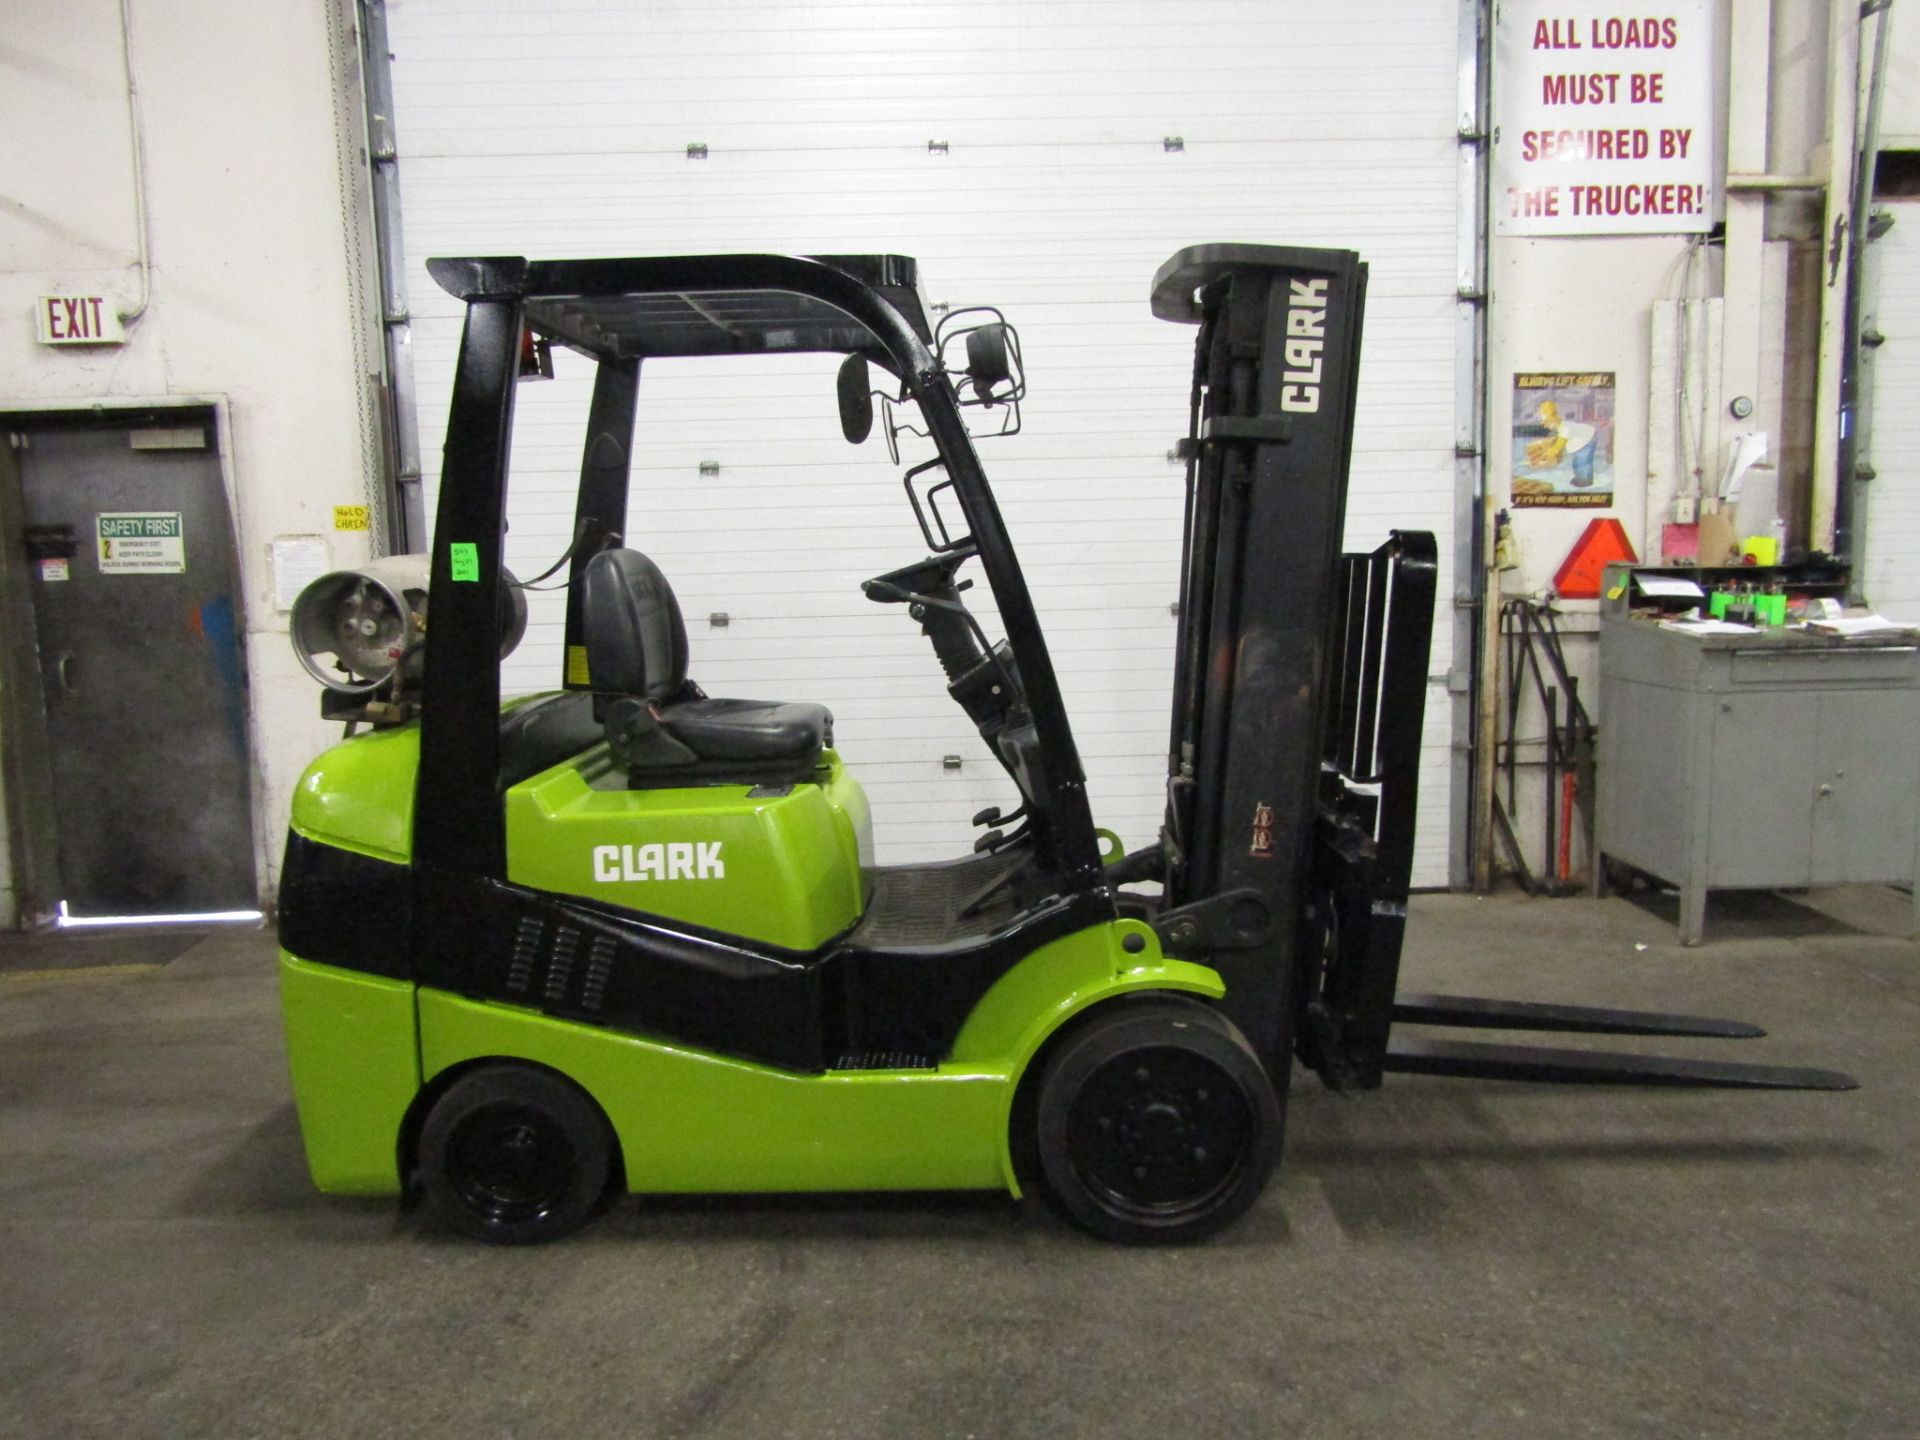 2014 Clark 6000lbs Capacity Forklift with 3-stage mast and sideshift - LPG (propane) AMAZING LOW